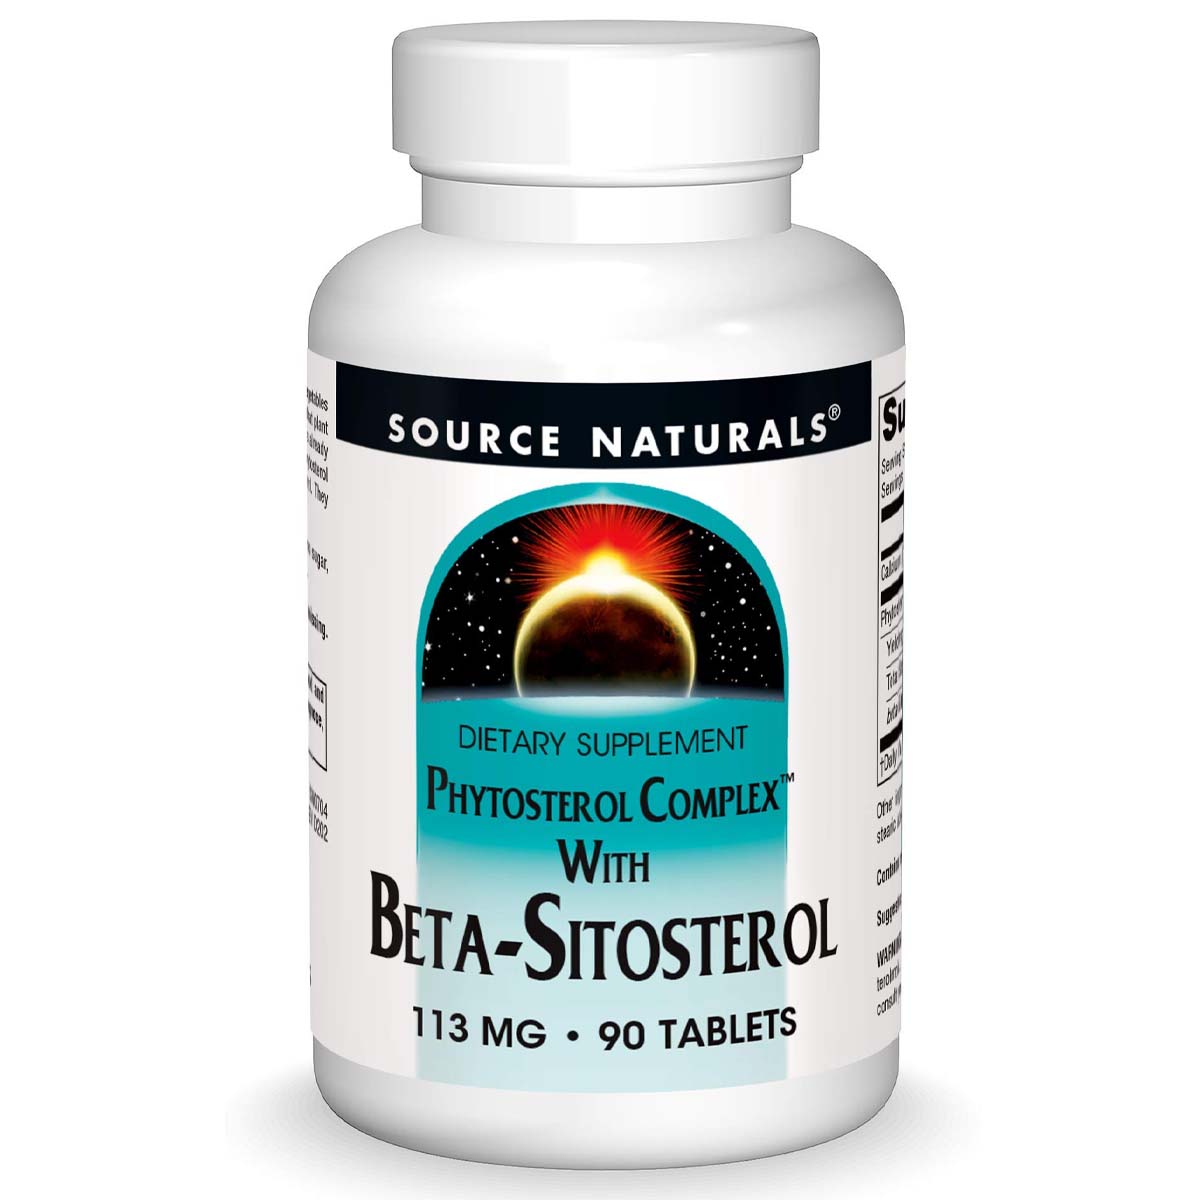 Source Naturals Phytosterol Complex with Beta Sitosterol 90 Tablets 113 mg